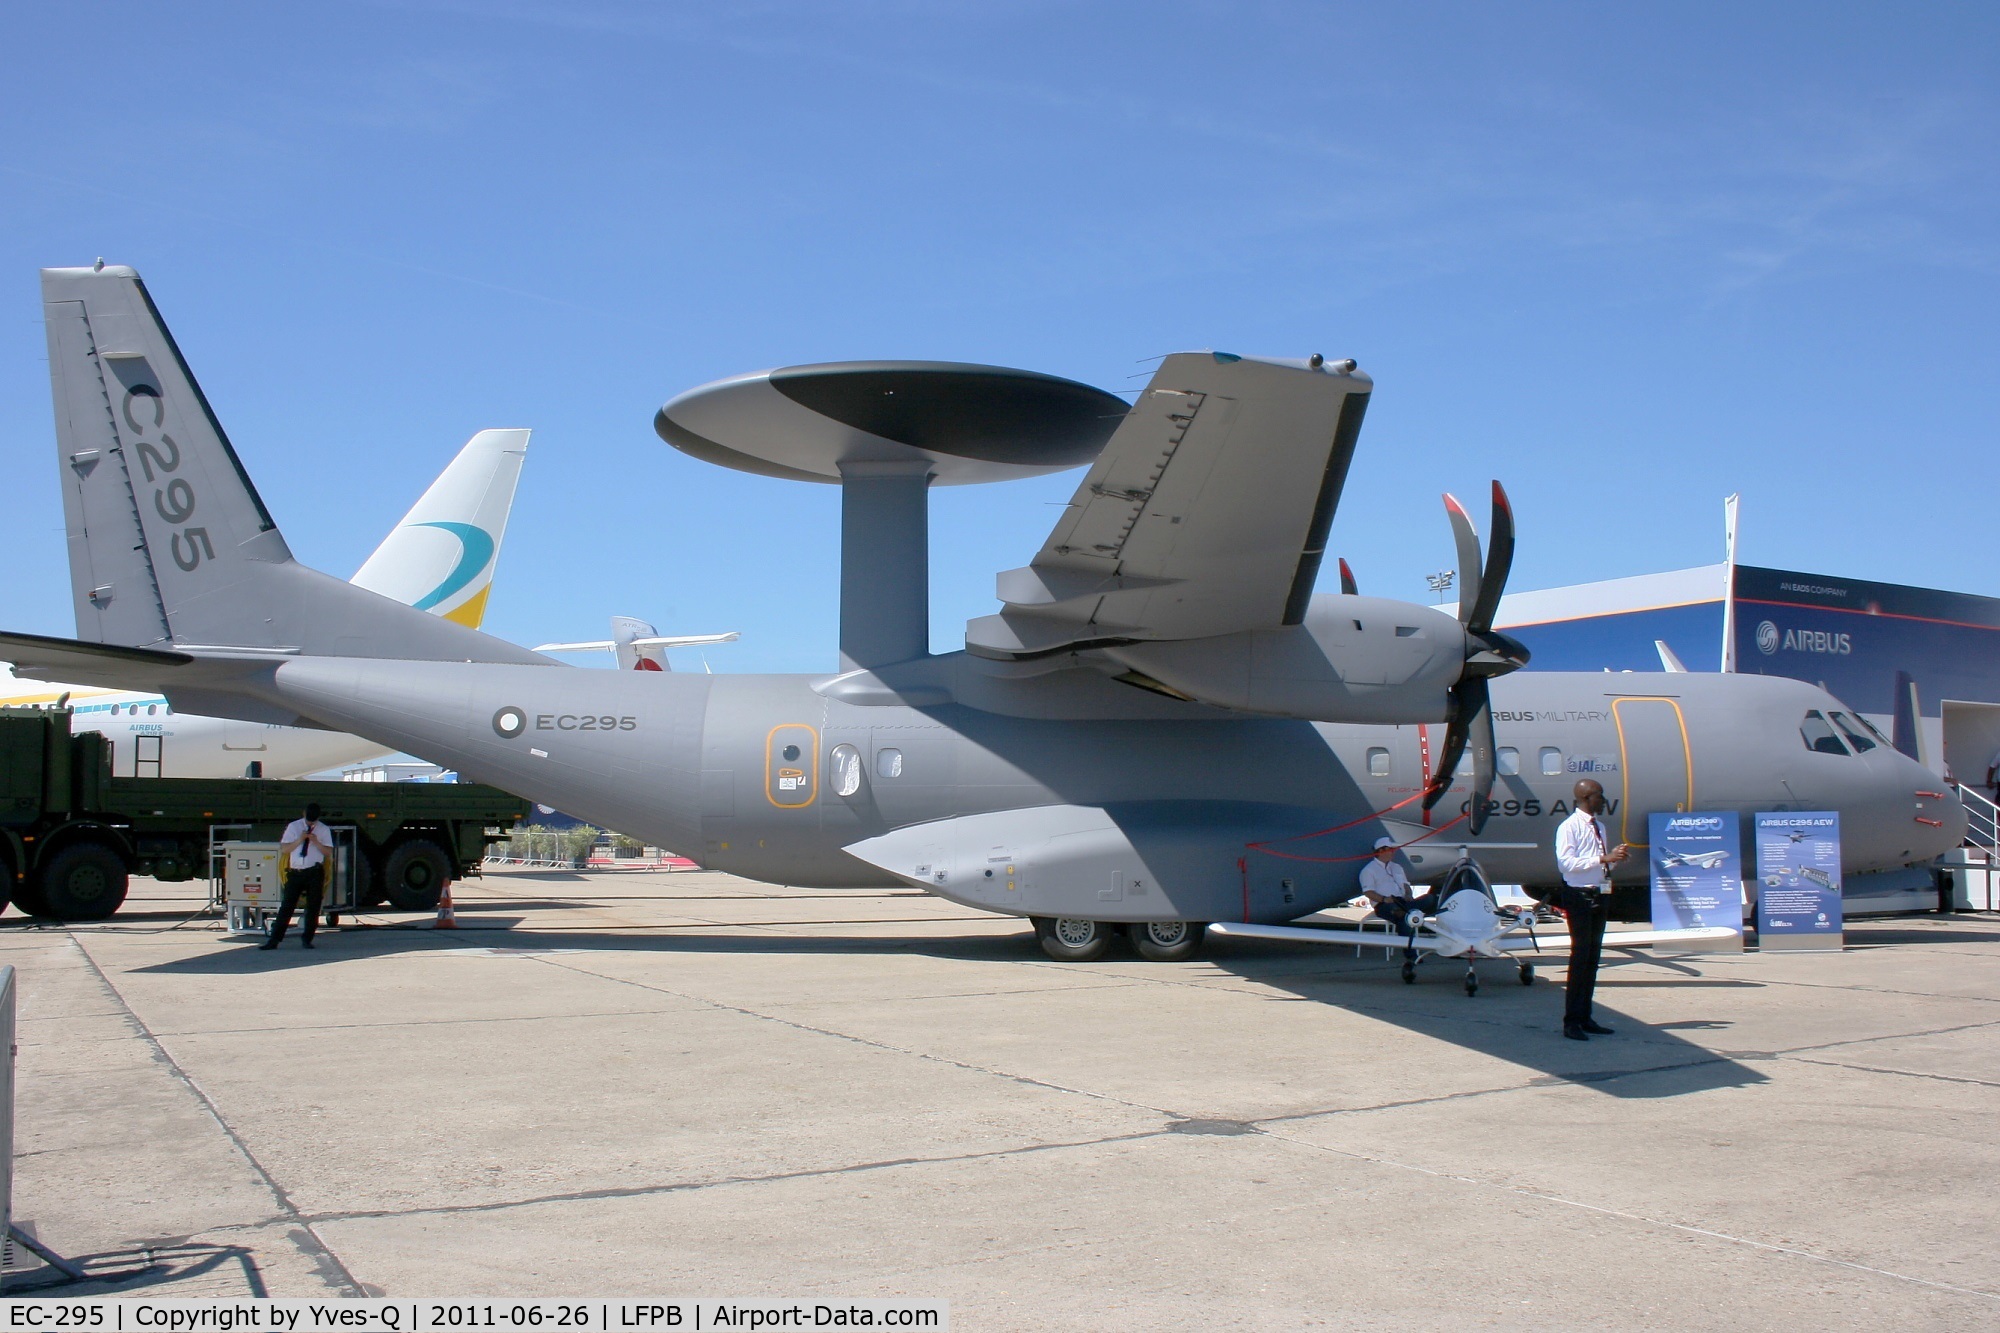 EC-295, 1997 CASA C-295M C/N P-001, Airbus Military C-295 AEW, Static display, Paris Le Bourget (LFPB-LBG) Air Show in june 2011. It's prototype airborne early warning and control version with 360 degree radar dome. The AESA radar was developed by IAI (Israel Aerospace Industries)